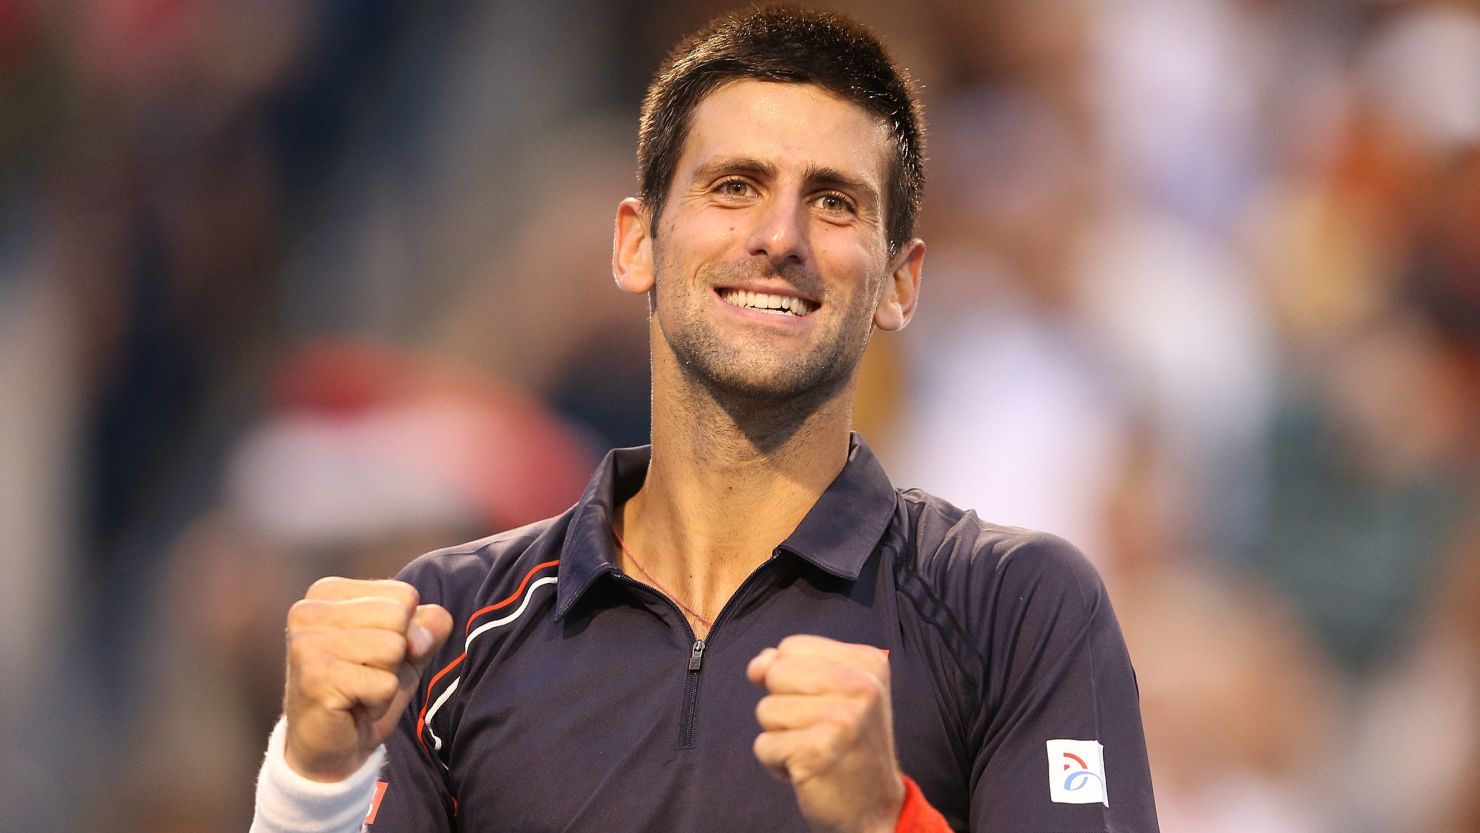 Serbia's Novak Djokovic lost his place at the top of the world rankings to Roger Federer last month.